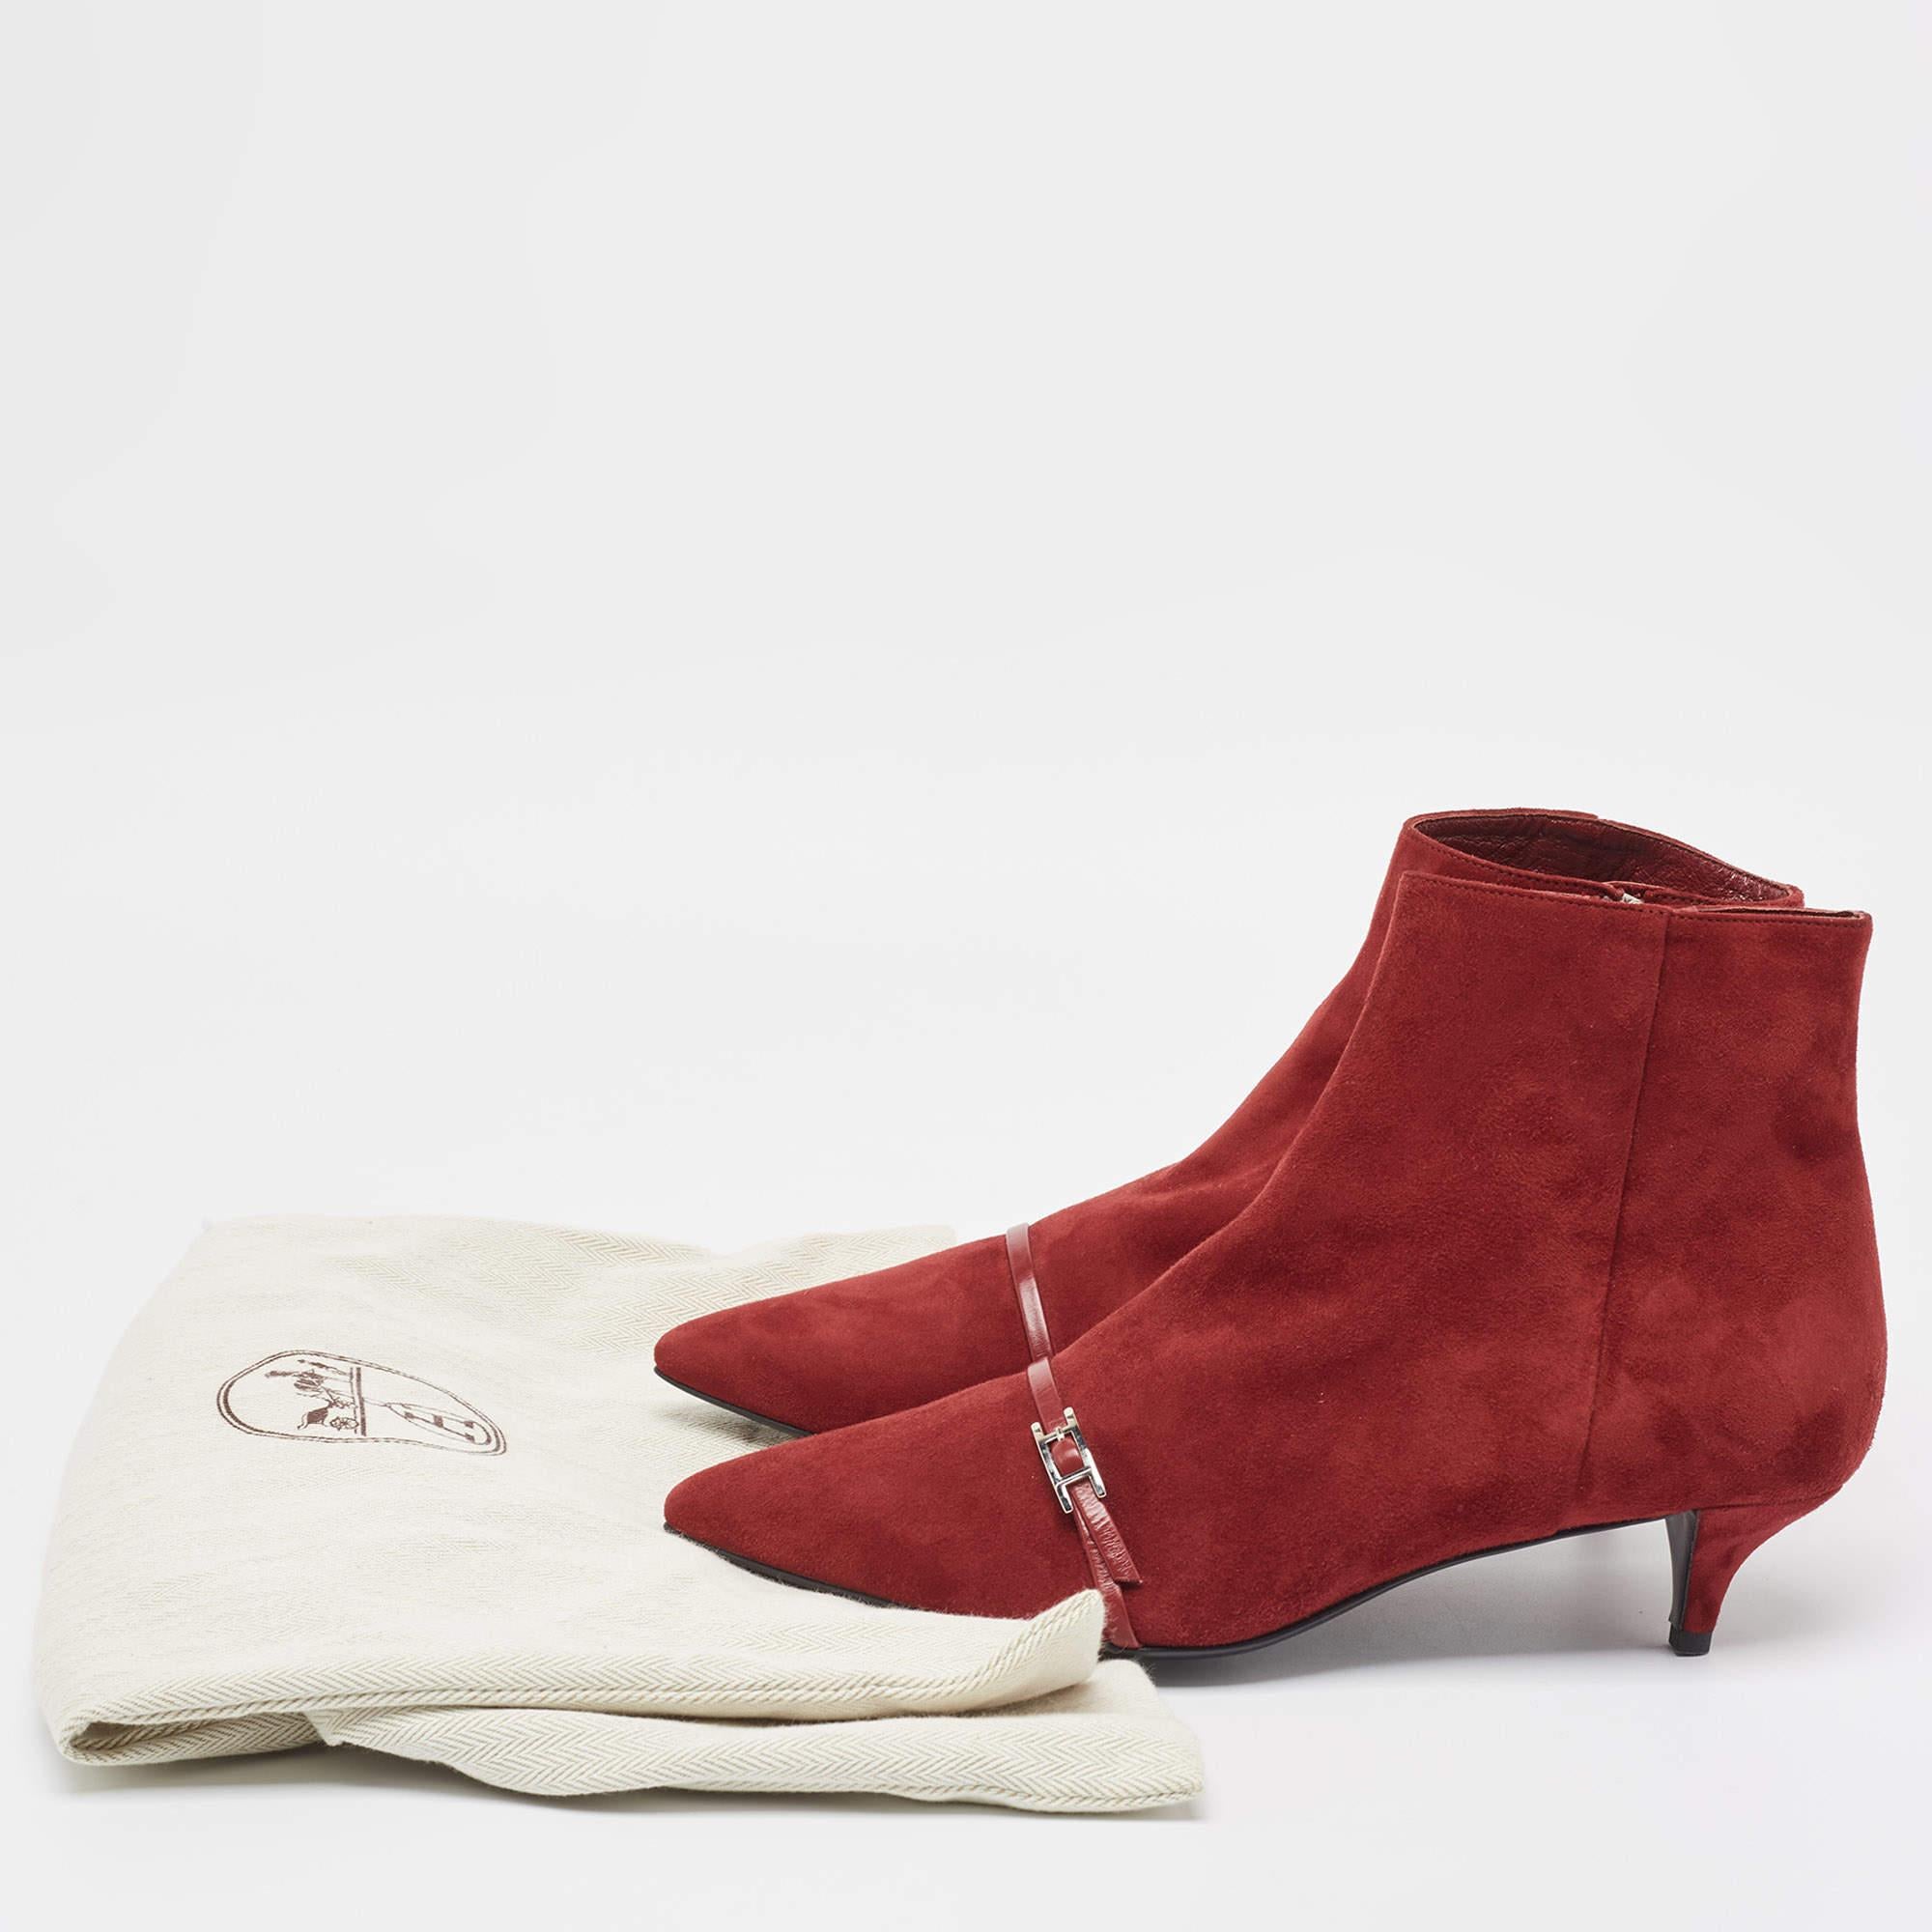 Hermès Dark Red Suede Ankle Booties Size 39 For Sale 5